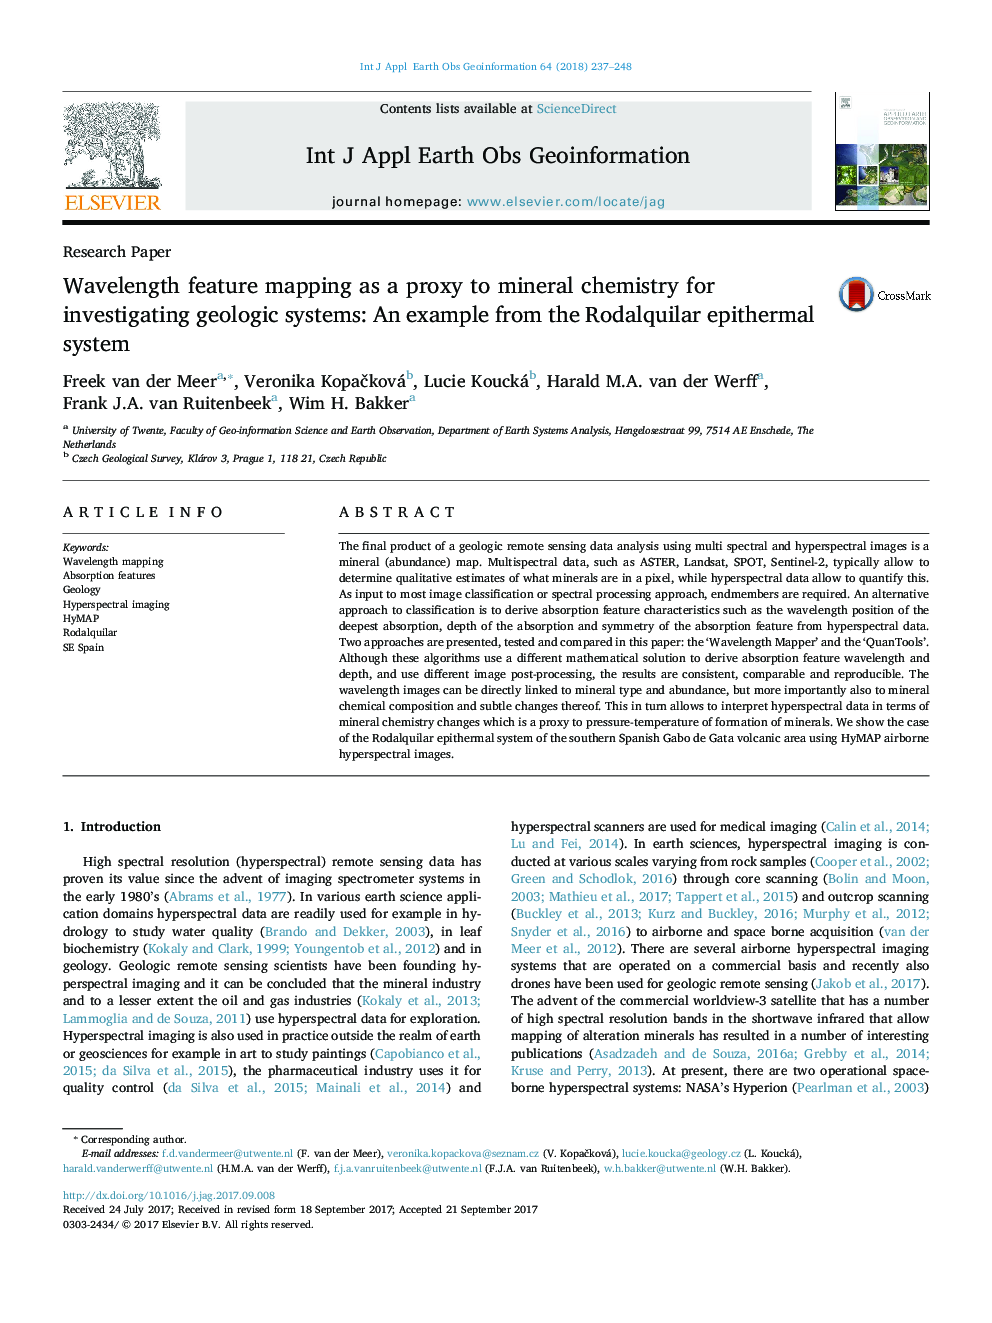 Wavelength feature mapping as a proxy to mineral chemistry for investigating geologic systems: An example from the Rodalquilar epithermal system